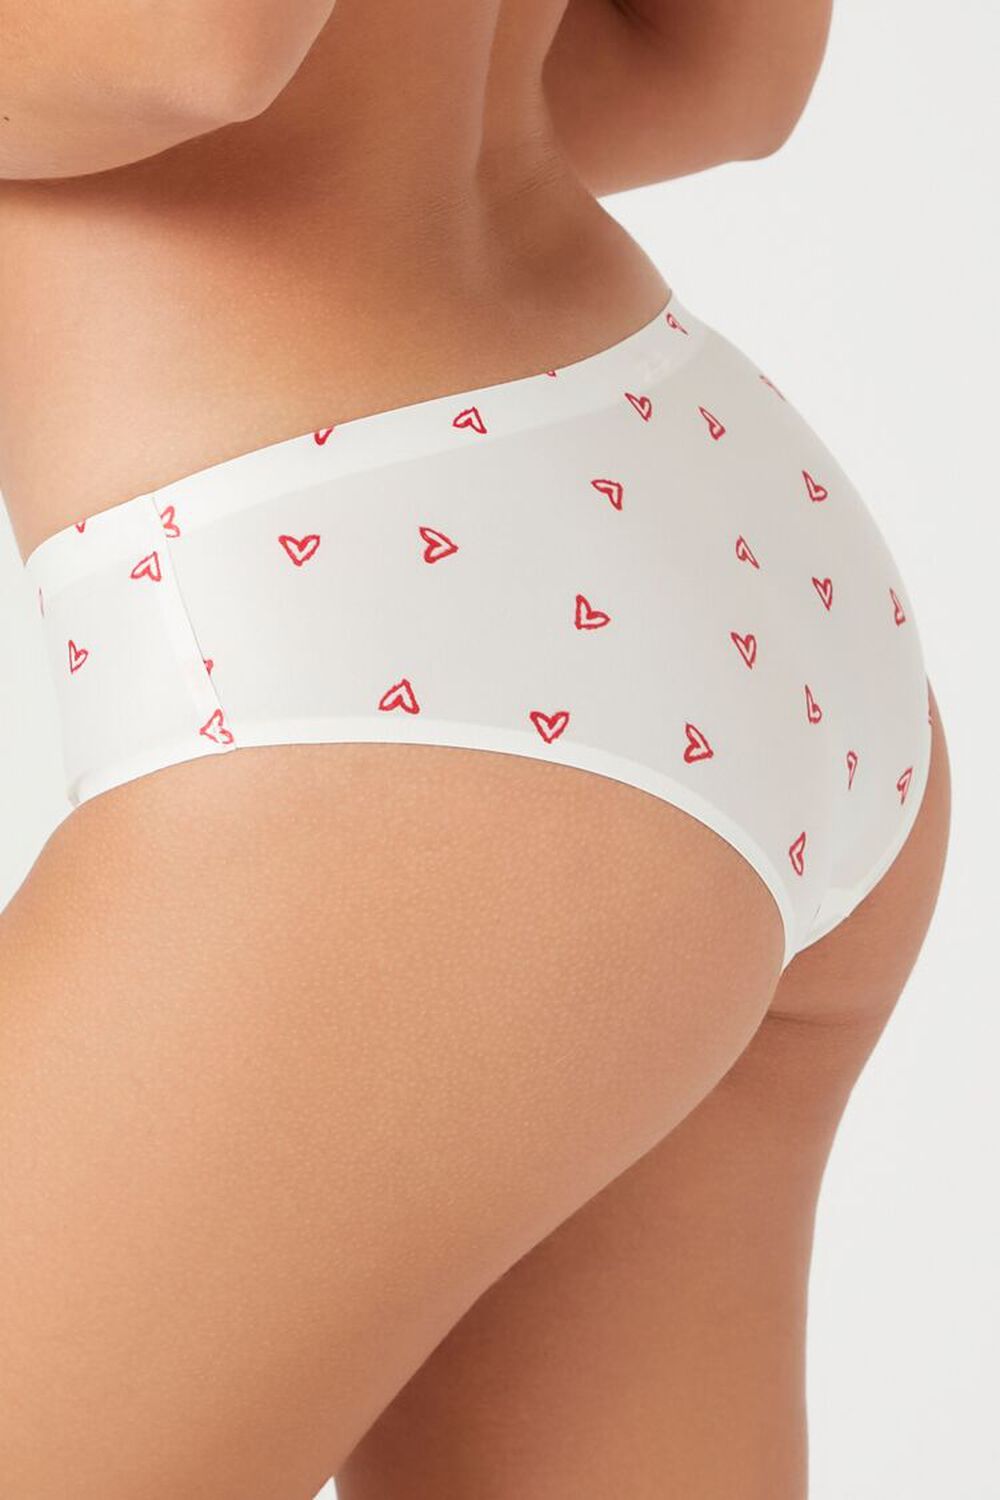  Underwear Women, Hipster Panties, Ultra Soft, Lovely Heart  Kawaii Pink : Clothing, Shoes & Jewelry